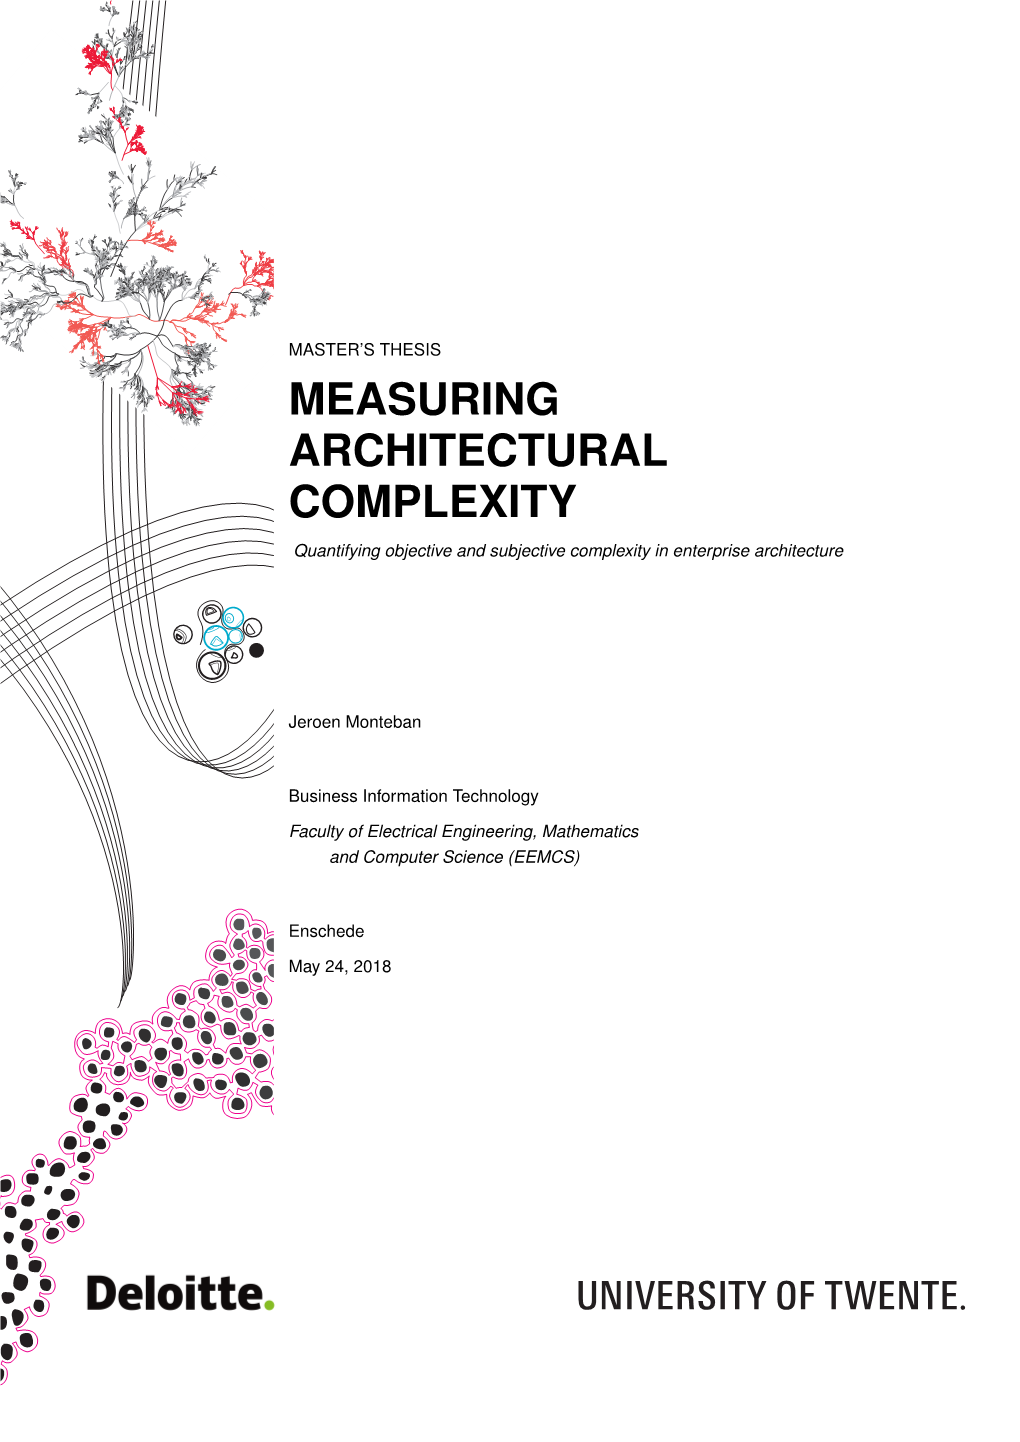 MEASURING ARCHITECTURAL COMPLEXITY Quantifying Objective and Subjective Complexity in Enterprise Architecture